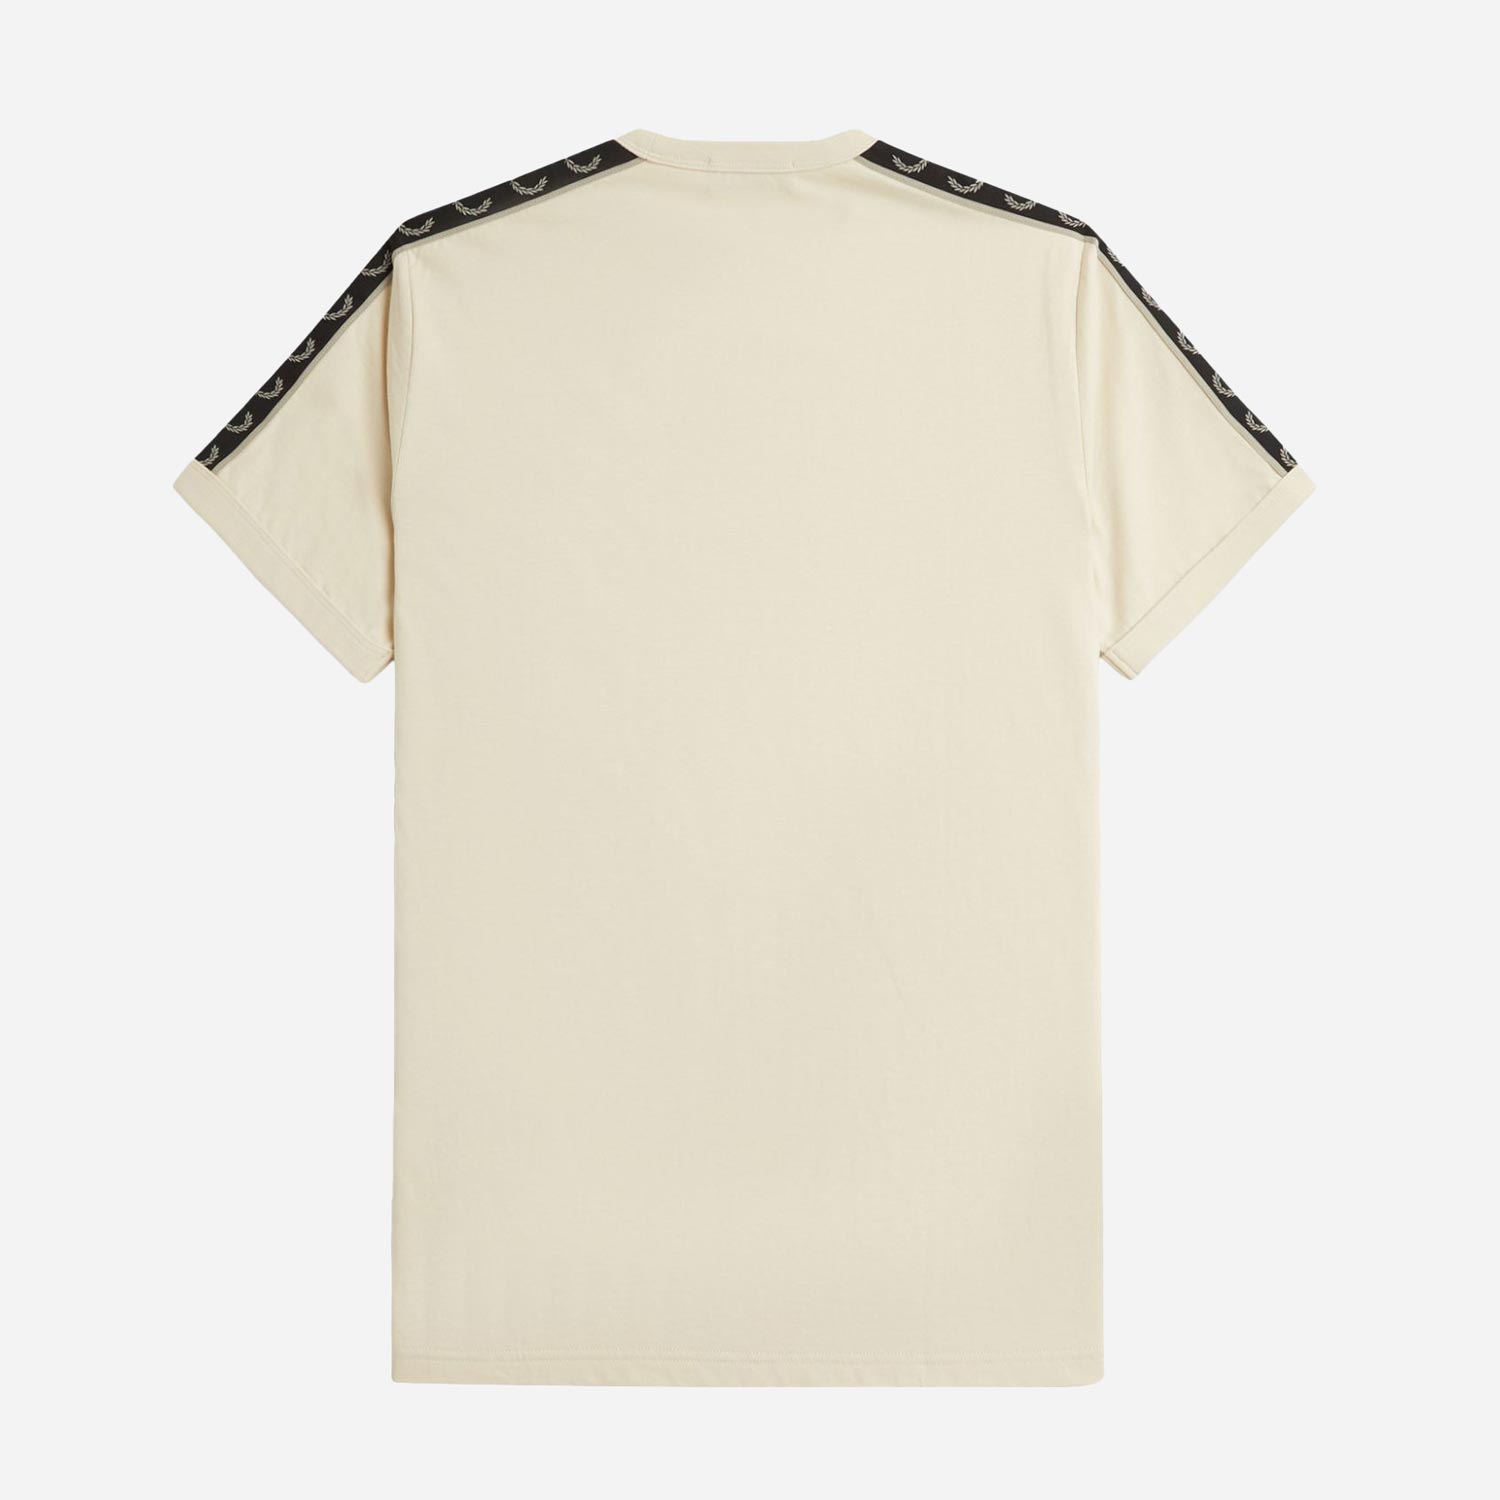 Fred Perry Contrast Tape Regular Fit Short Sleeve Ringer Tee - Oatmeal/Warm Grey